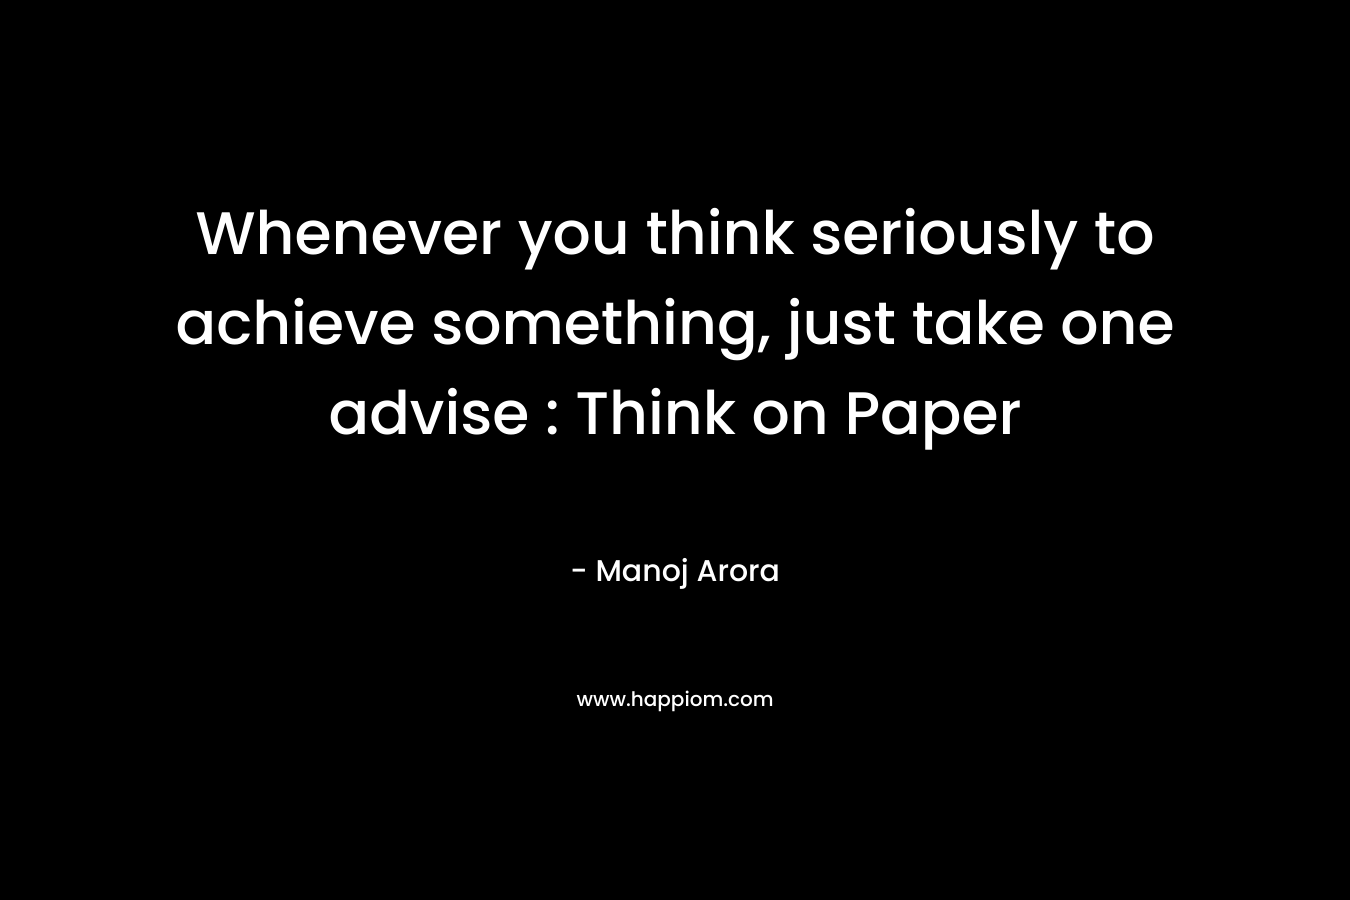 Whenever you think seriously to achieve something, just take one advise : Think on Paper